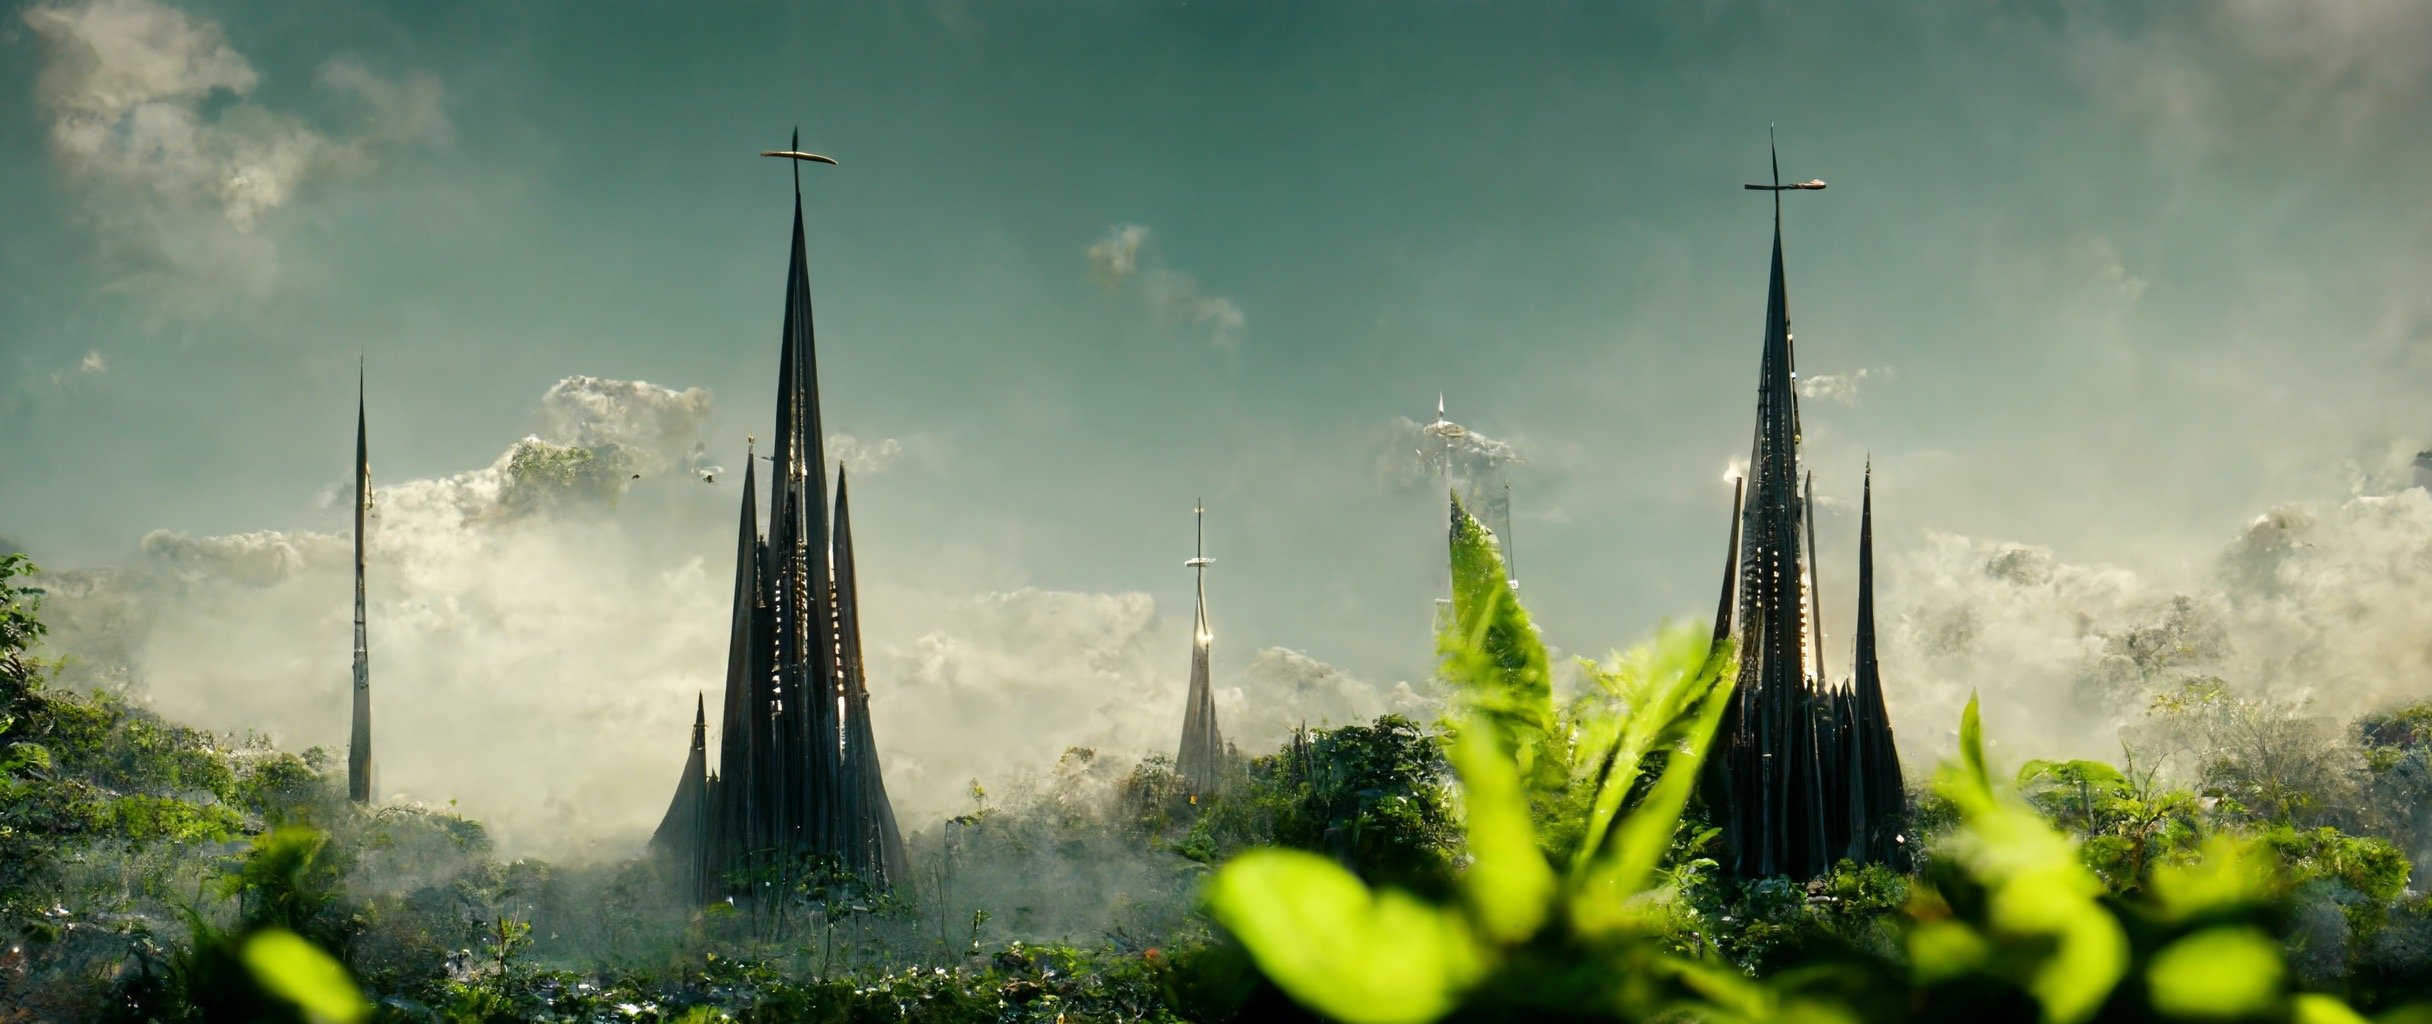 330924f6-0fa0-4132-be18-ec6386abaa29_S3RAPH_epic_futuristic_cathedral._Filled_with_lush_plant_life._cinematic_composition_8k_render_w_2048_h_858.JPG